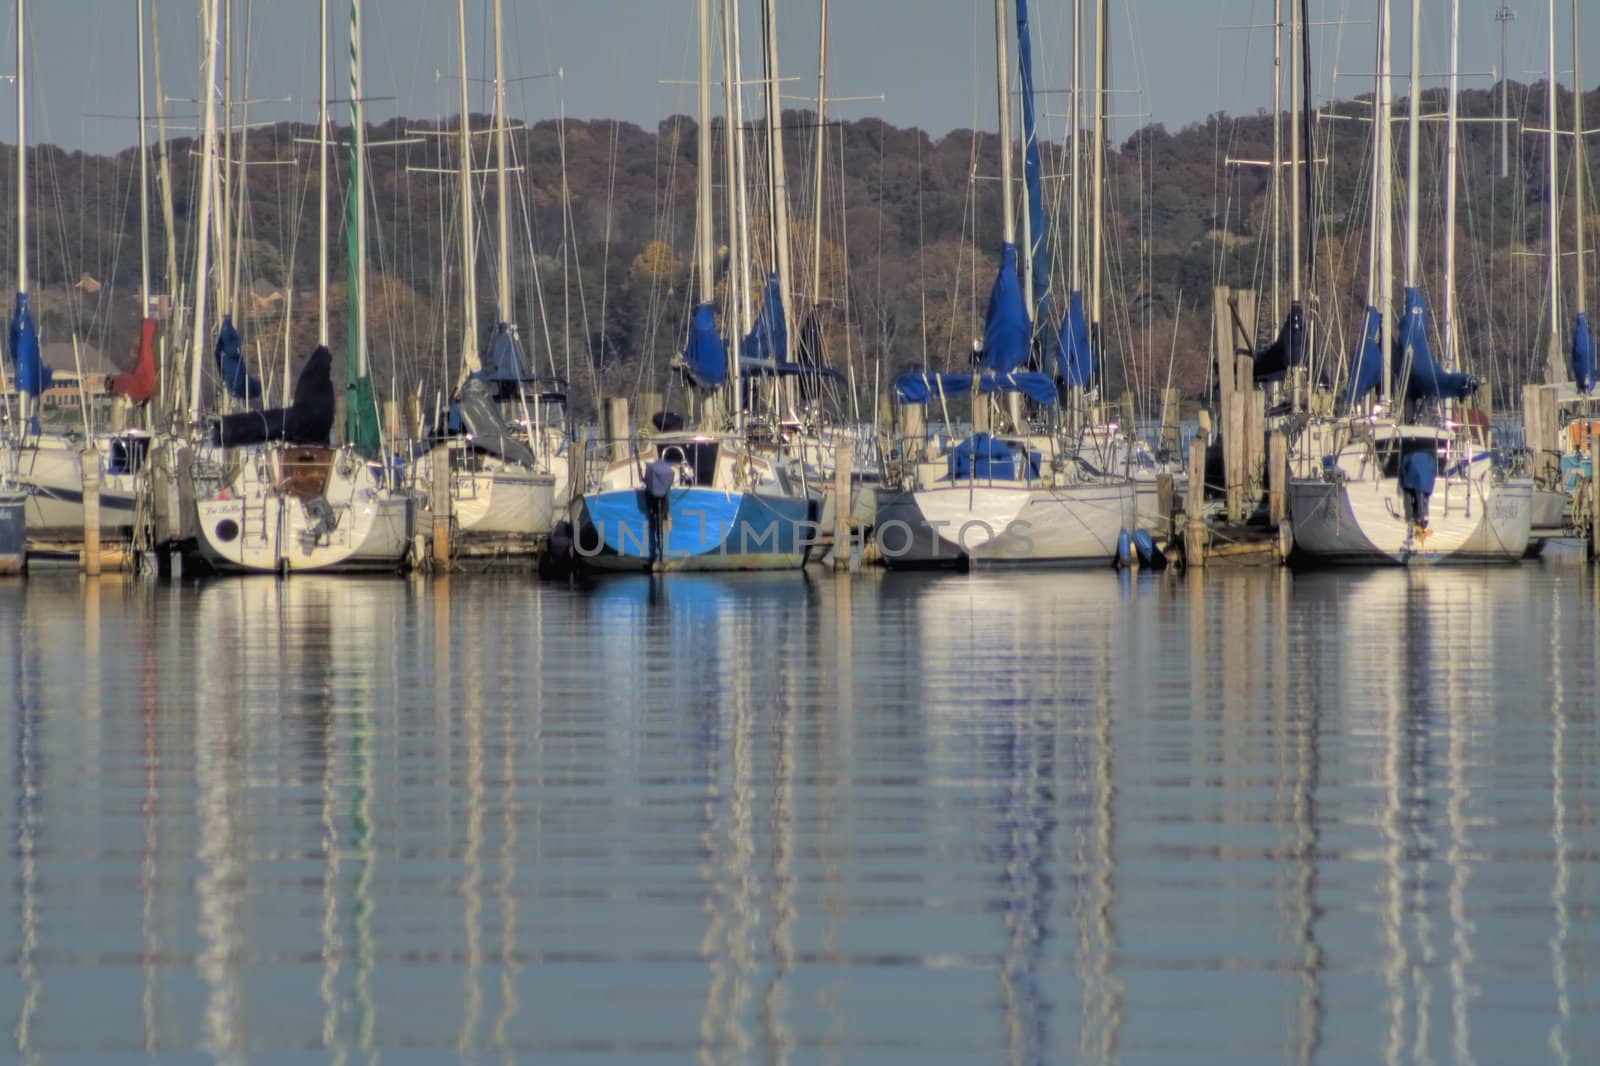 Yatches at anchor in a marina in Fall.